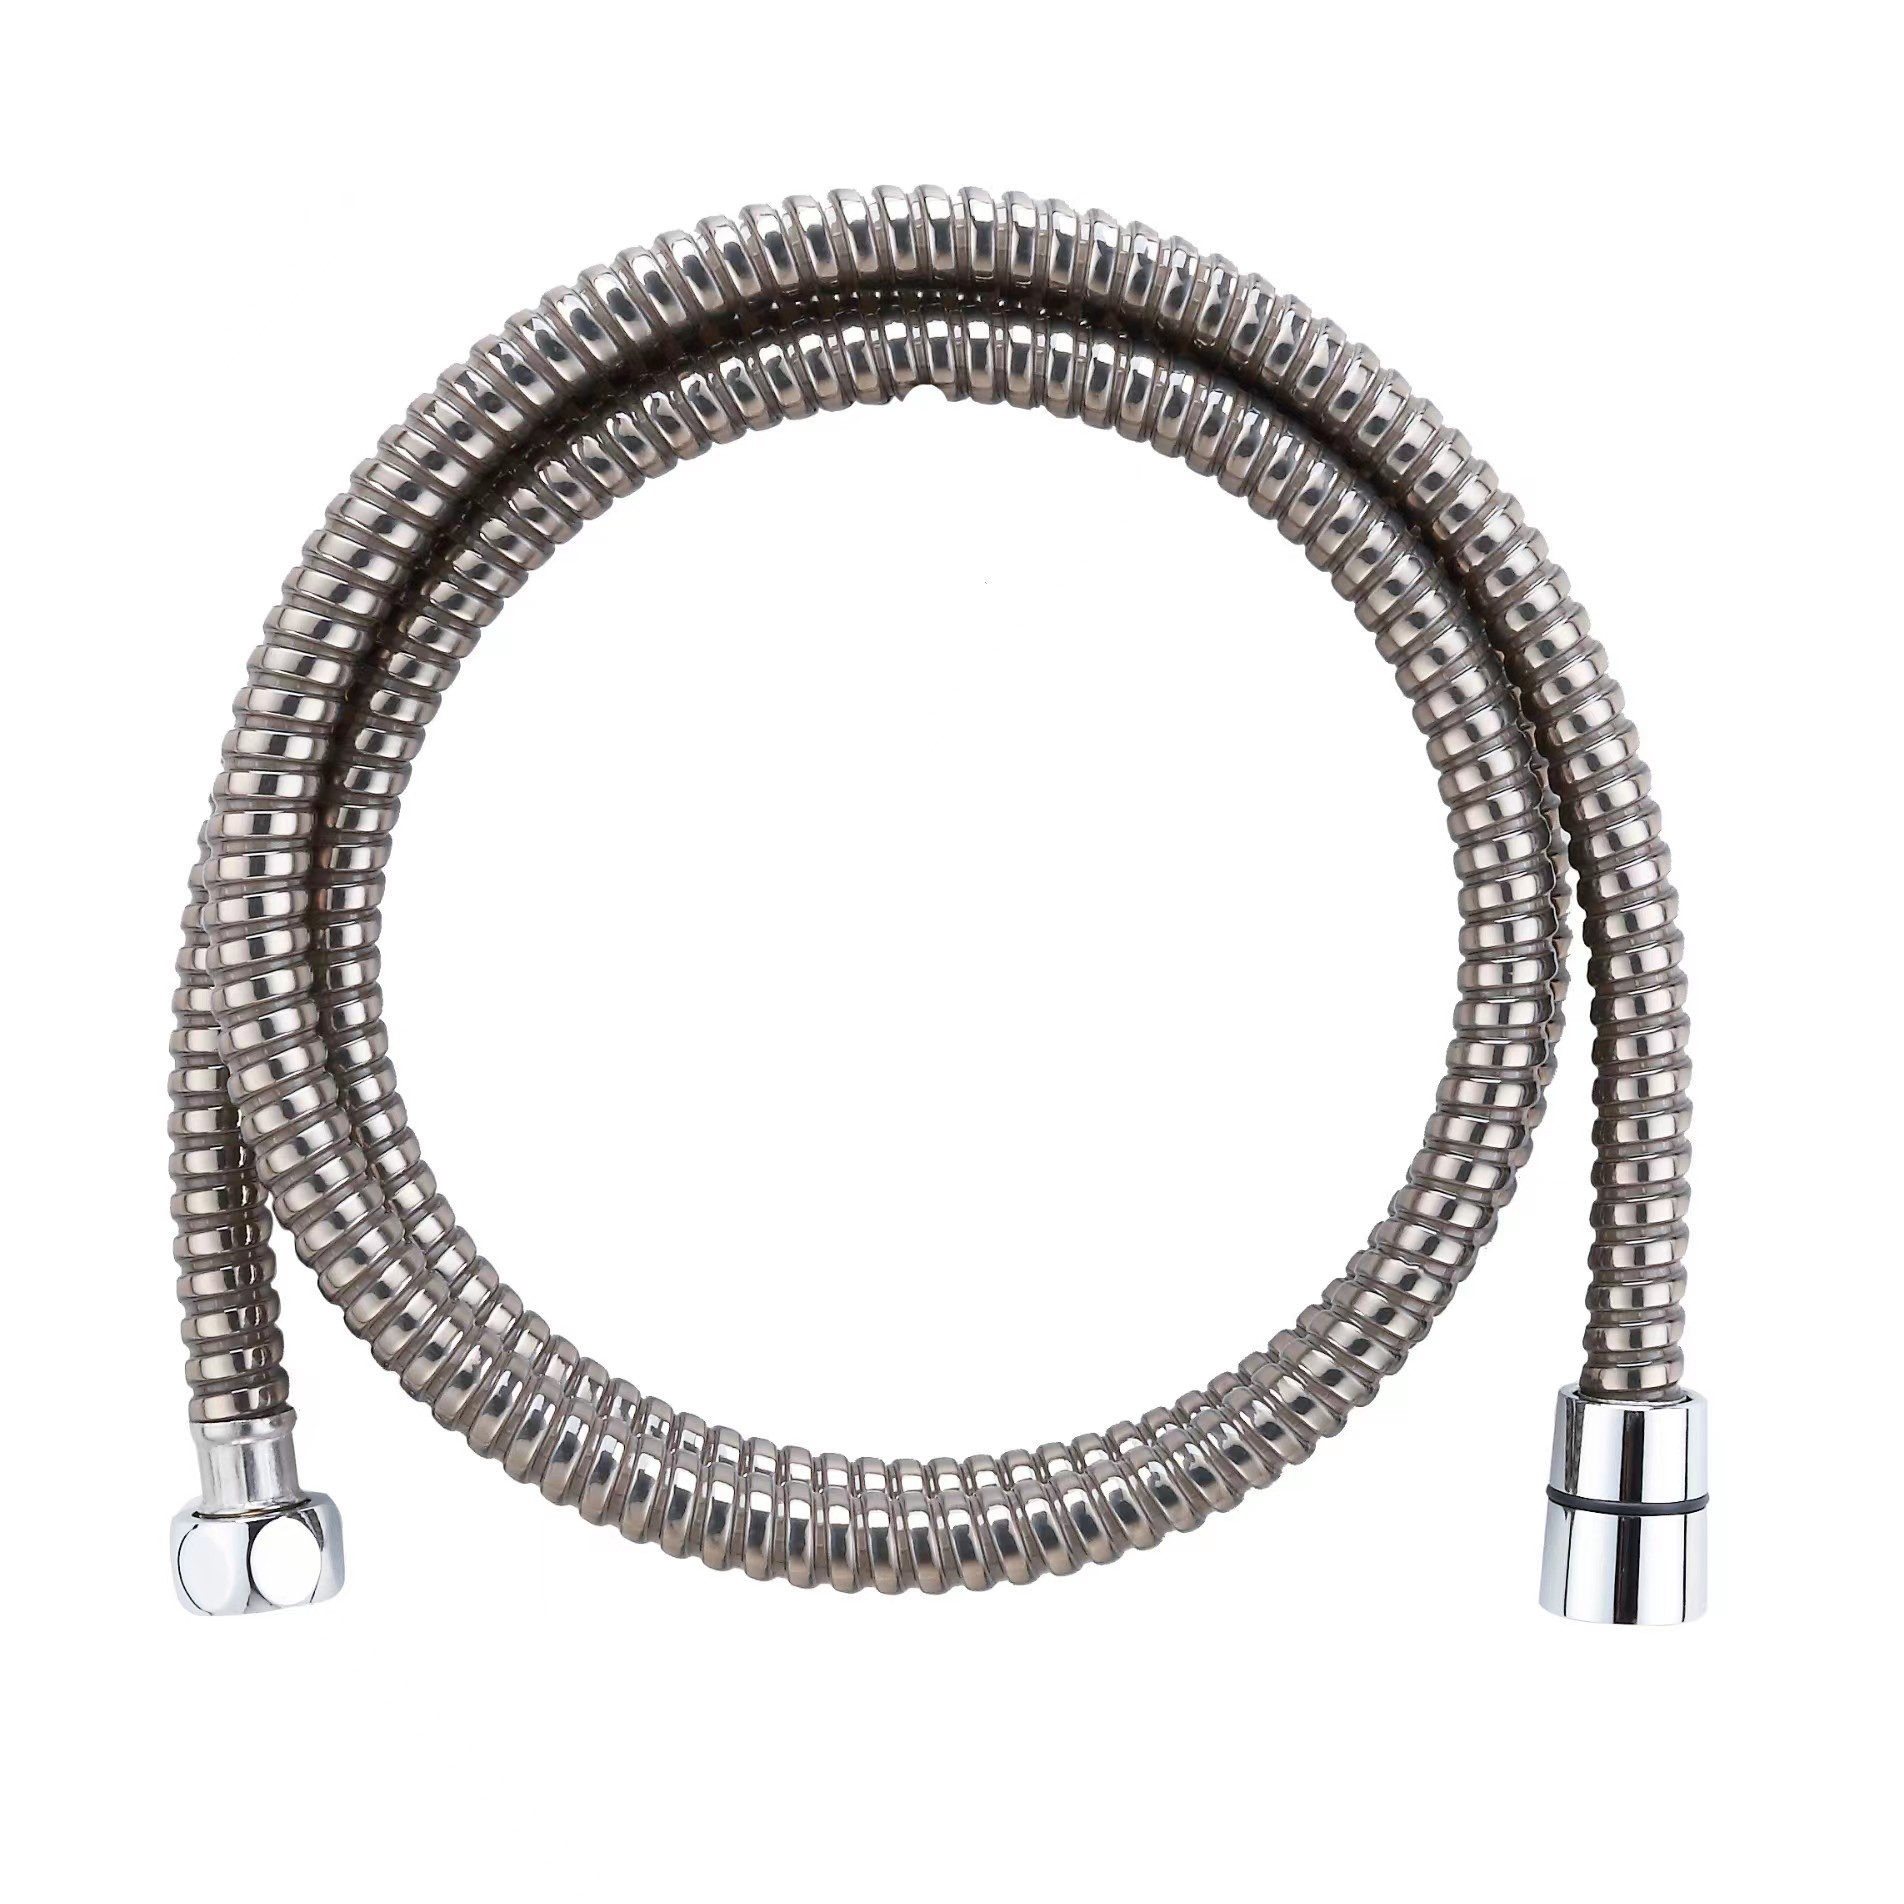 Superior Chrome Finished High Pressure Stainless Steel S.S. Double Lock Flexible Shower Hose